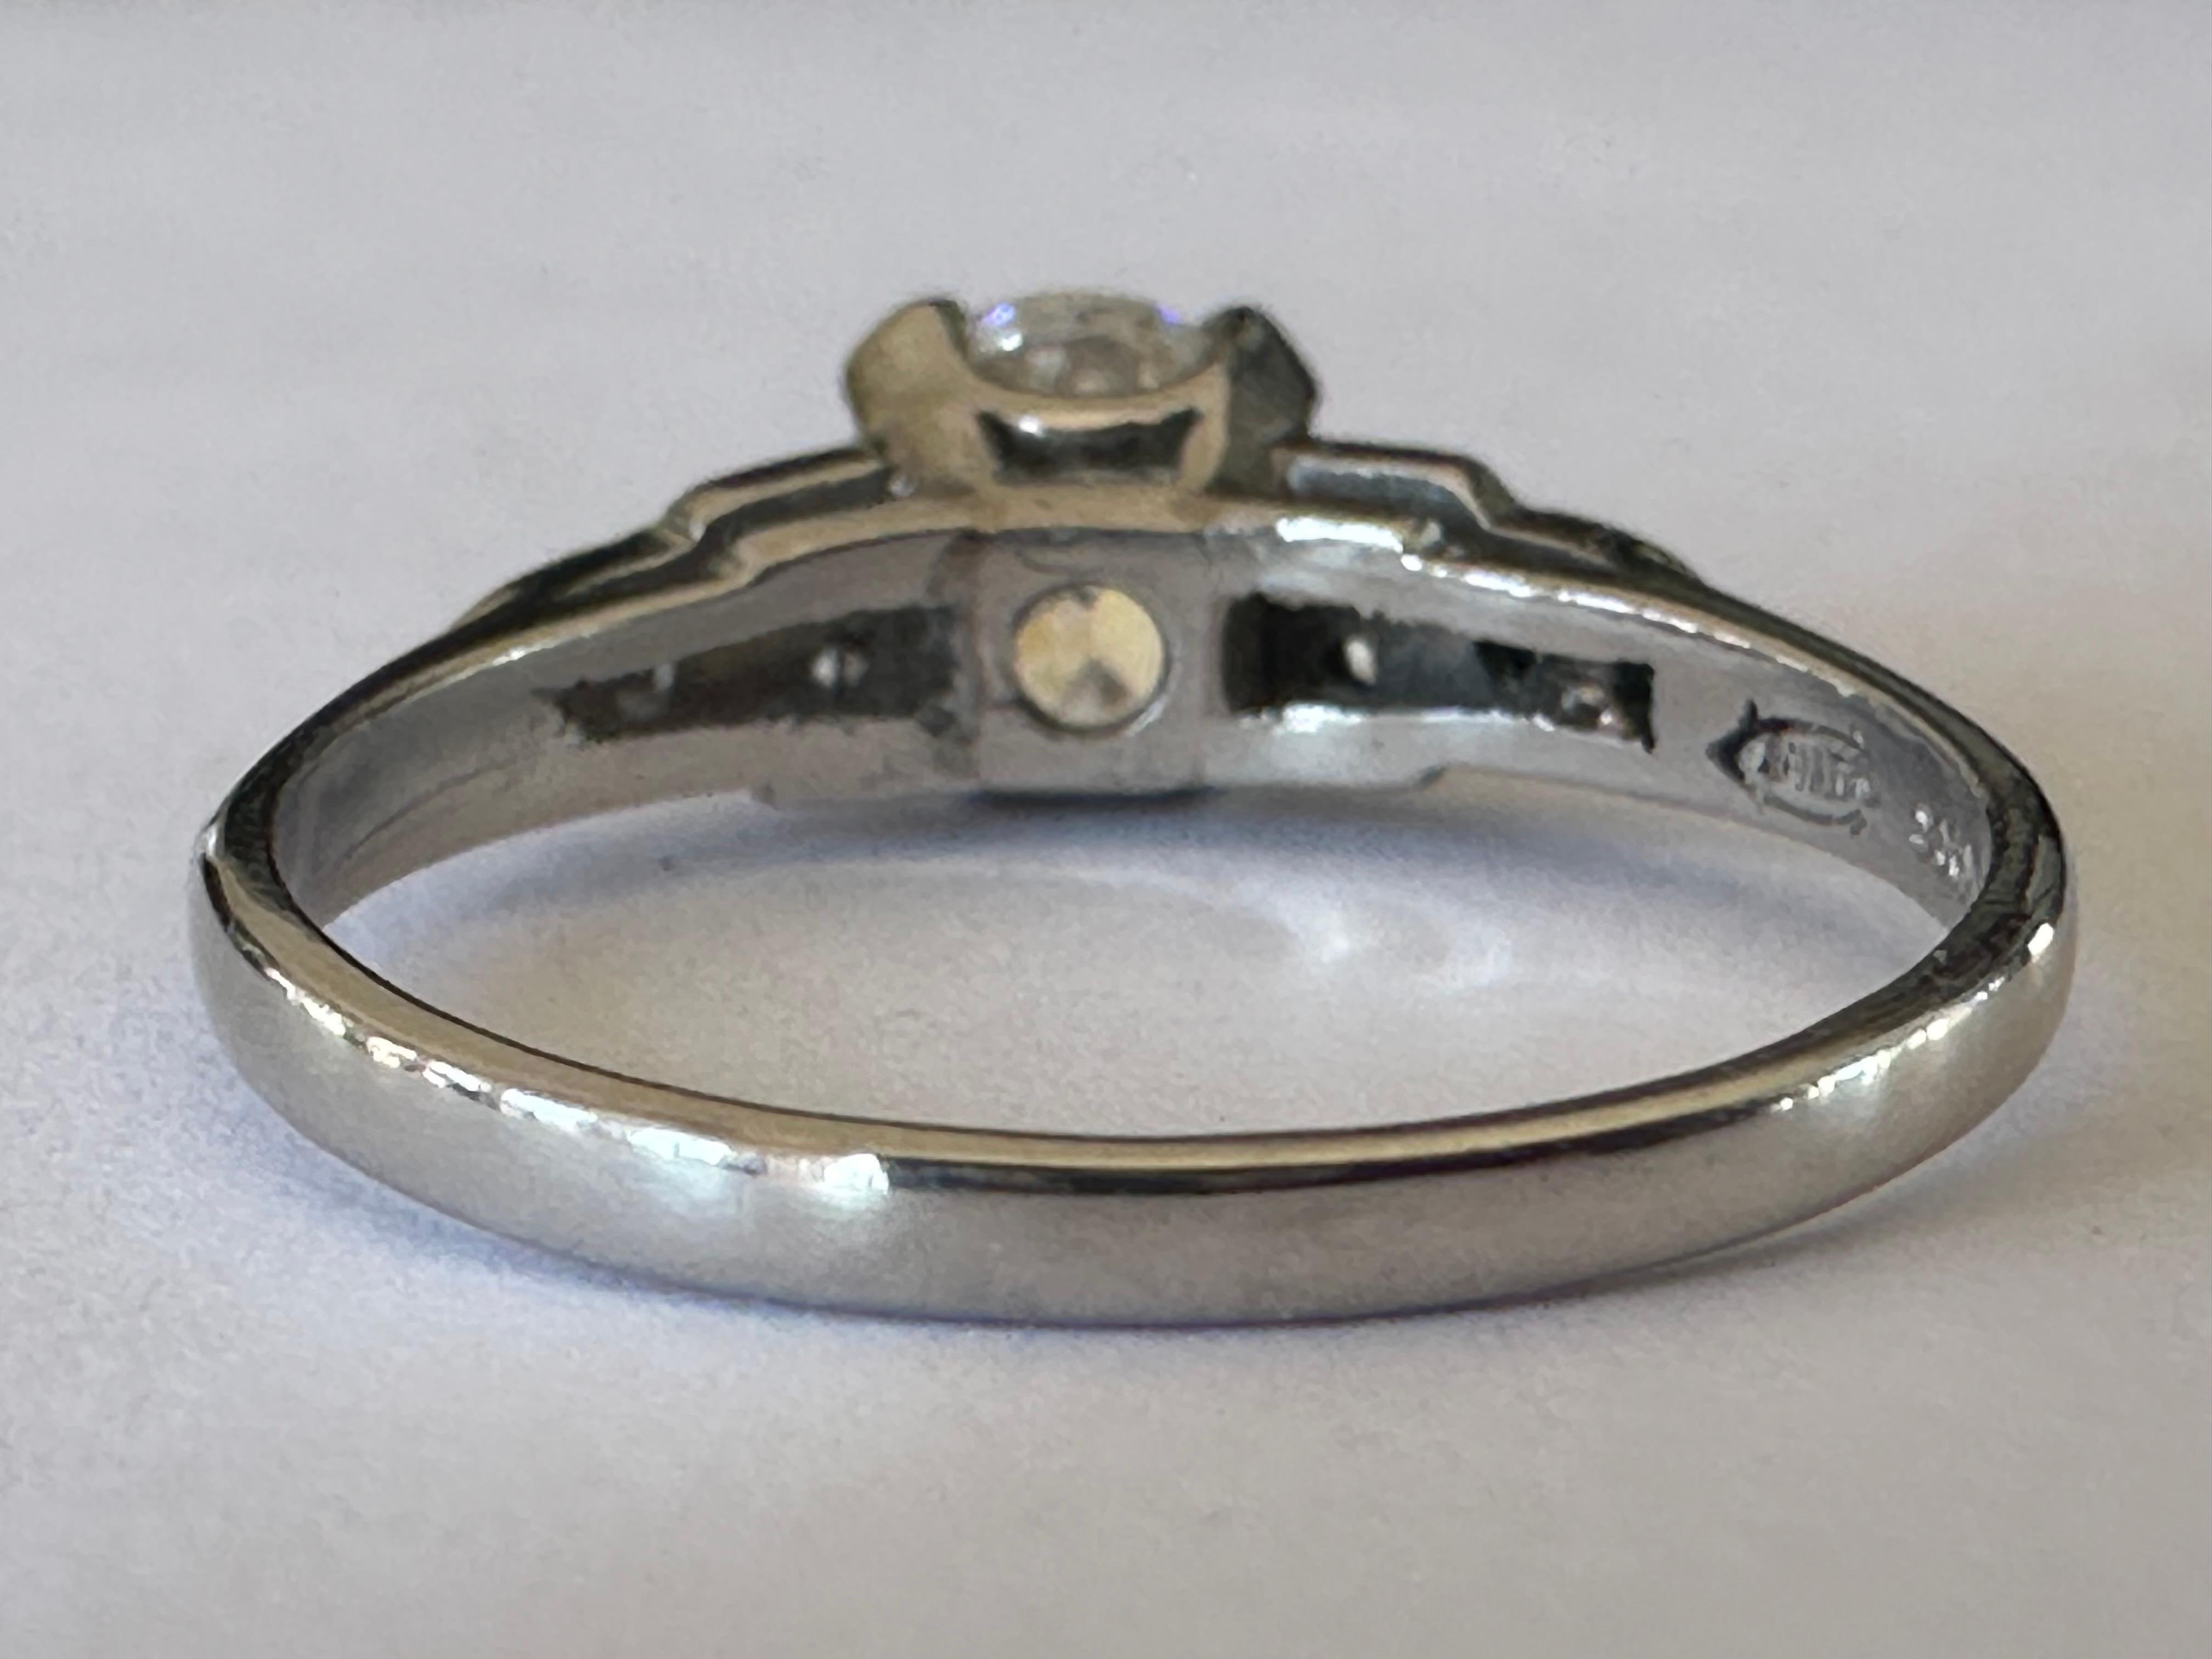 Art Deco Diamond Engagement Ring  In Good Condition For Sale In Denver, CO